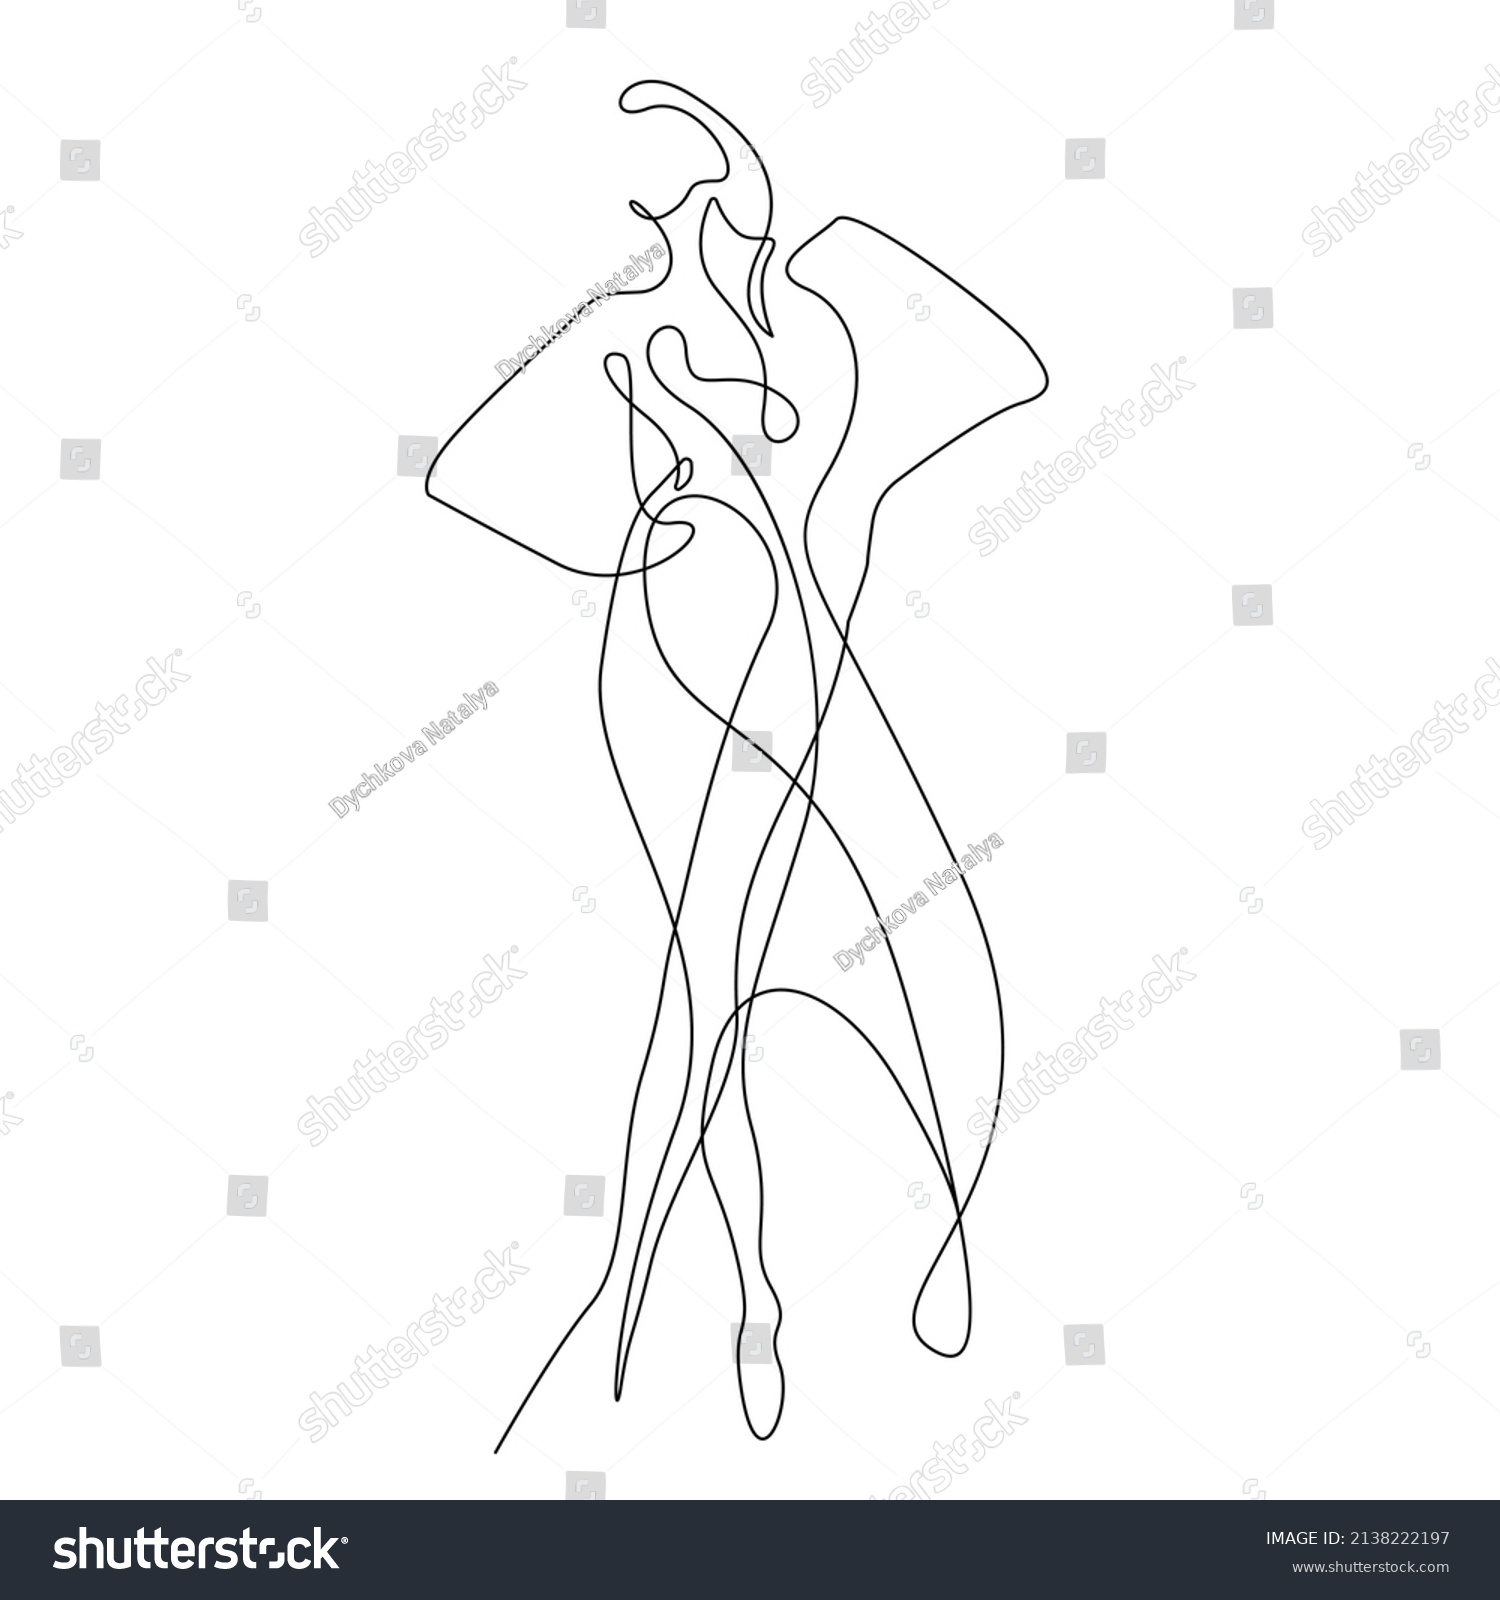 Abstract Woman Line Art Drawing Elegant Stock Vector (Royalty Free ...